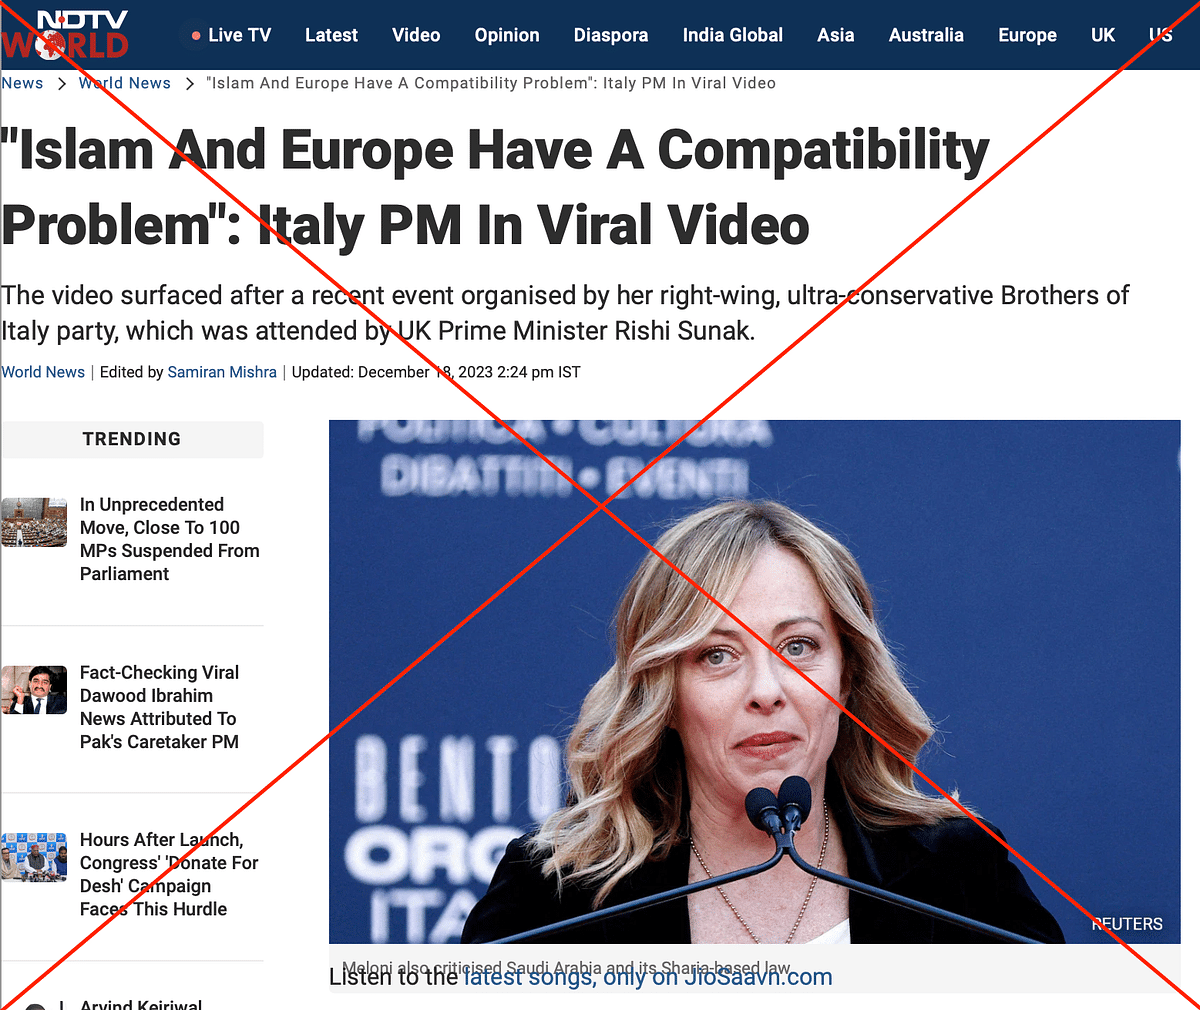 The video dates back to February 2018 and was shot before Giorgia Meloni became the Italian prime minister.